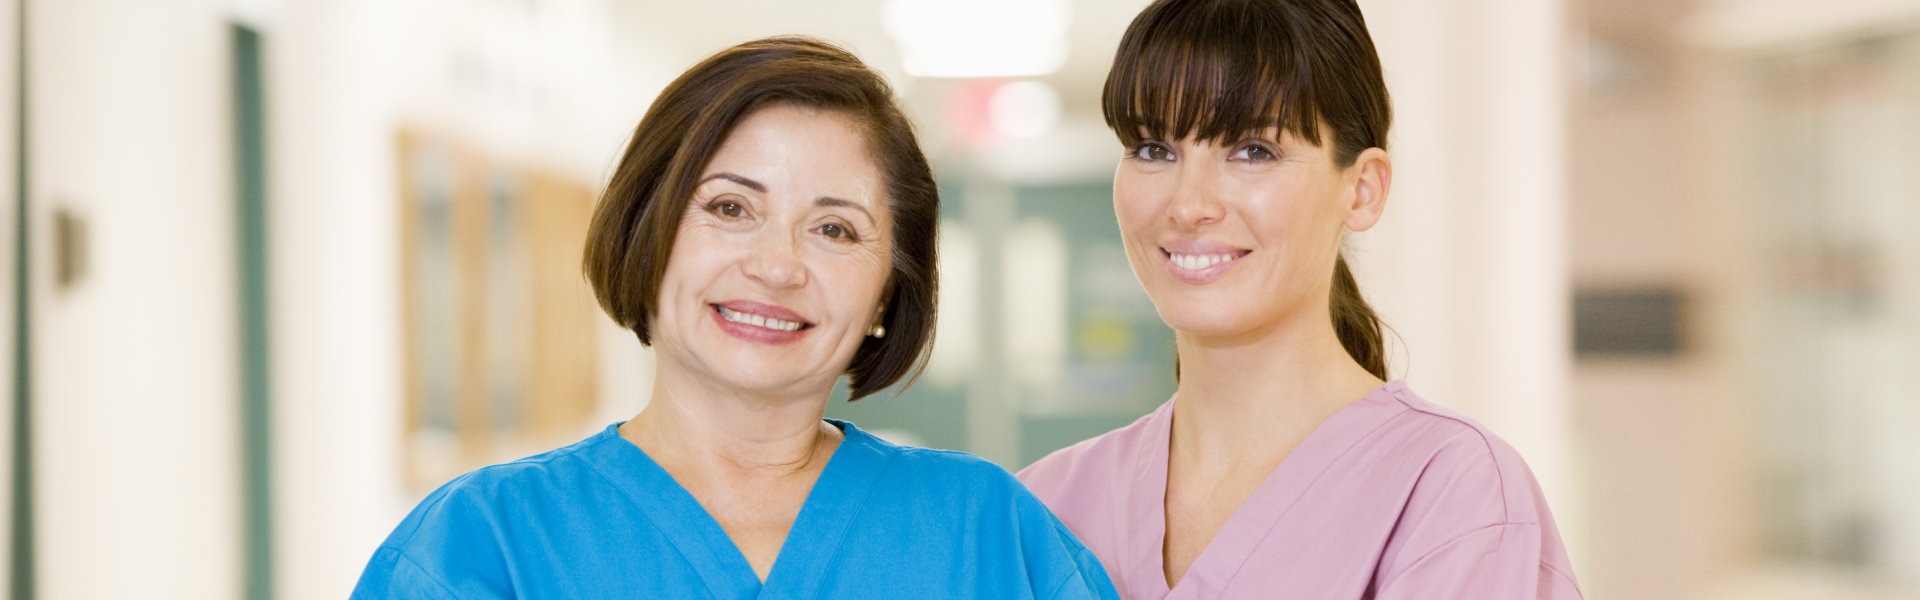 two nurse smiling and looking at the camera